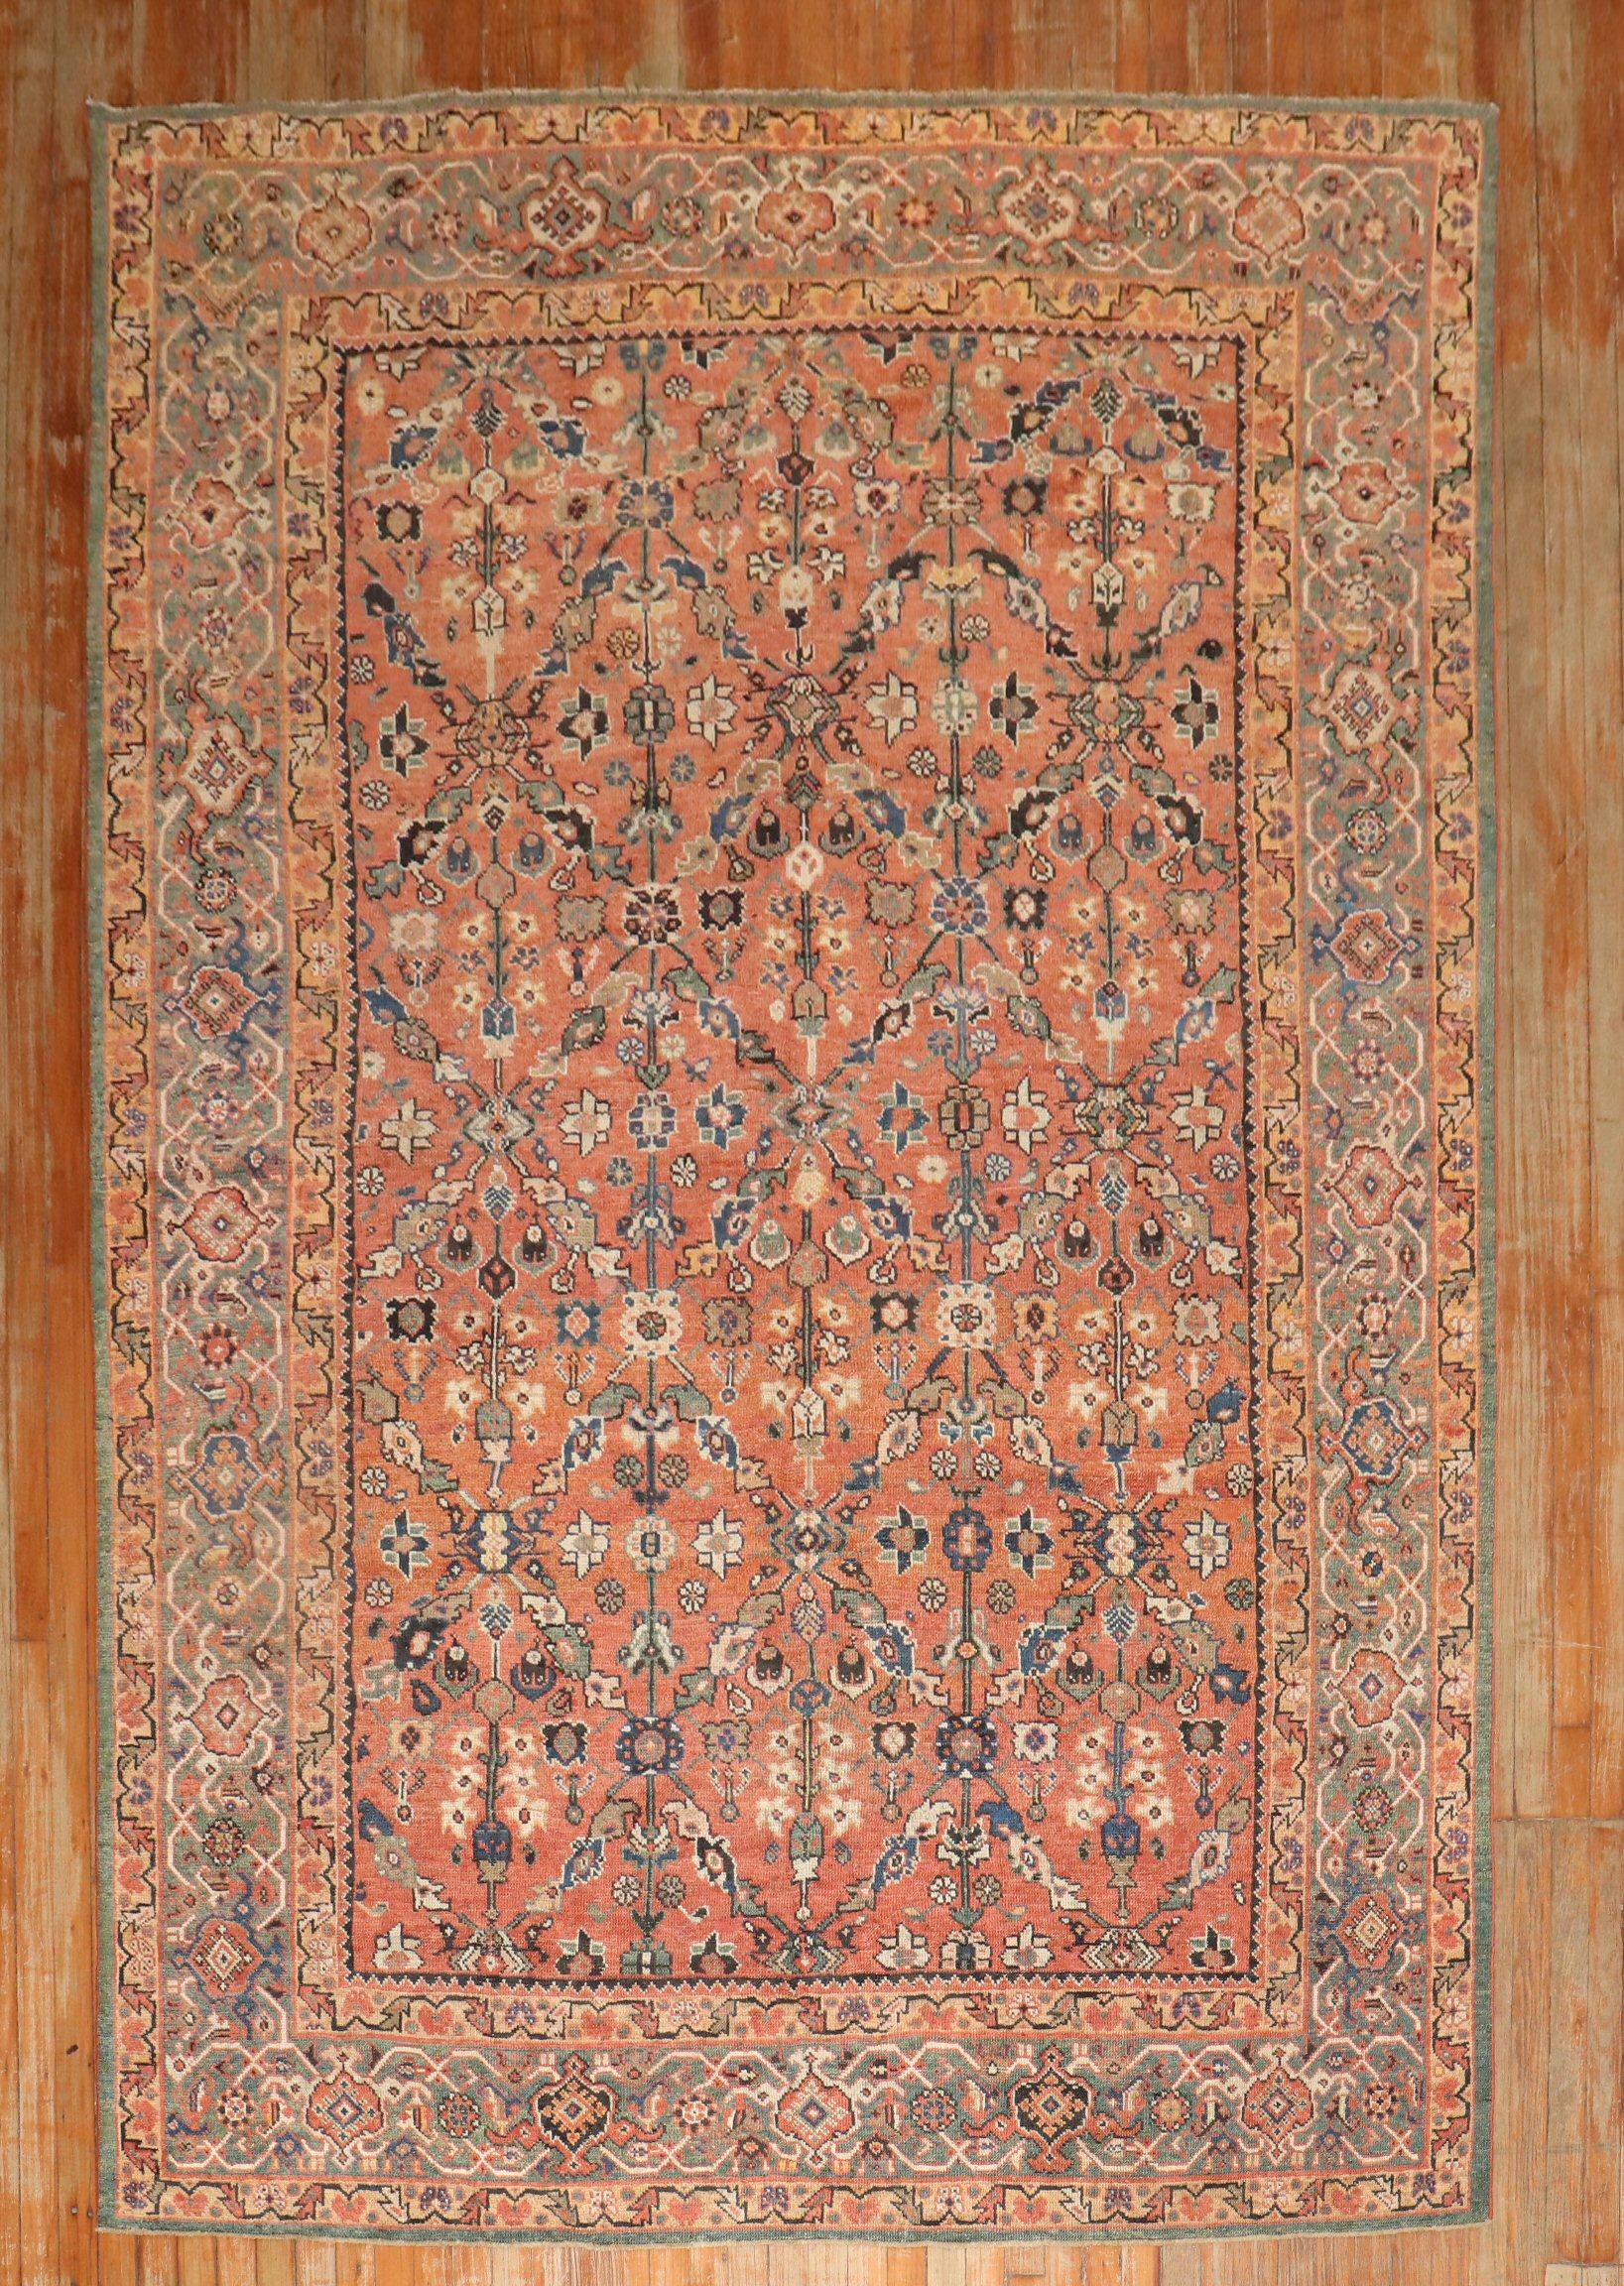 an early 20th Century Persian Mahal Antique Rug

Details
rug no.	j3184
size	6' 9